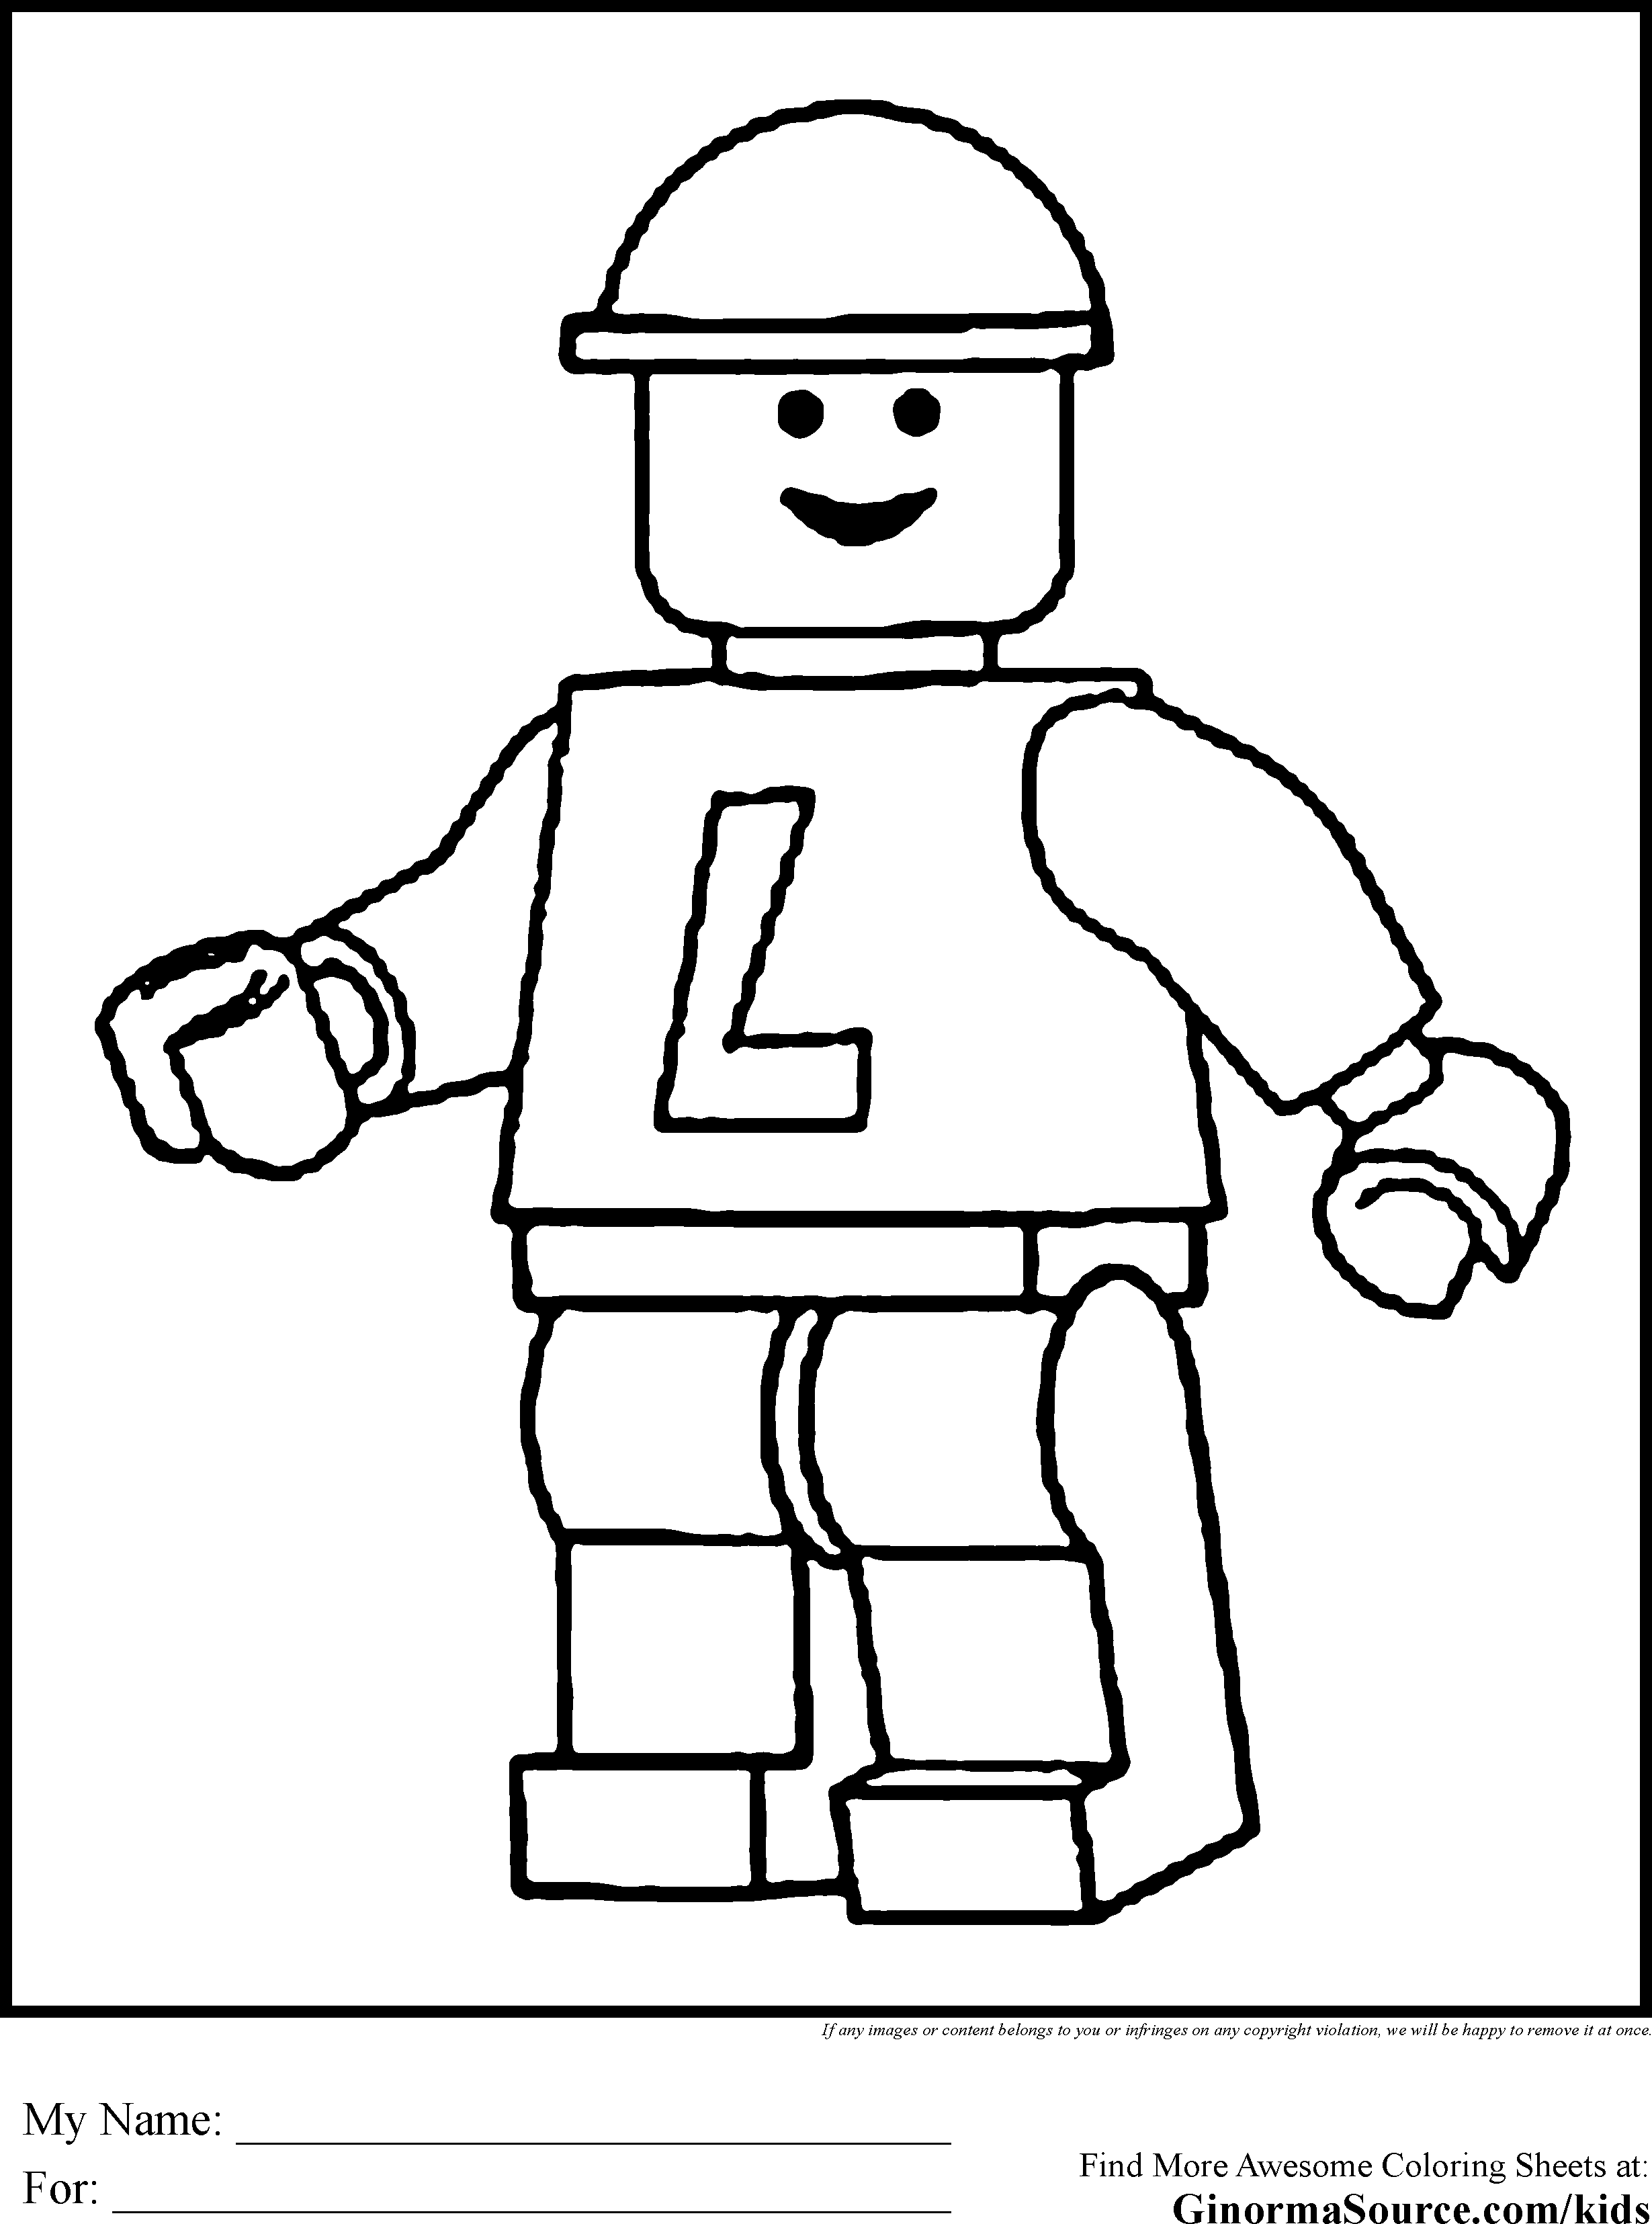 Colorful lego coloring pages